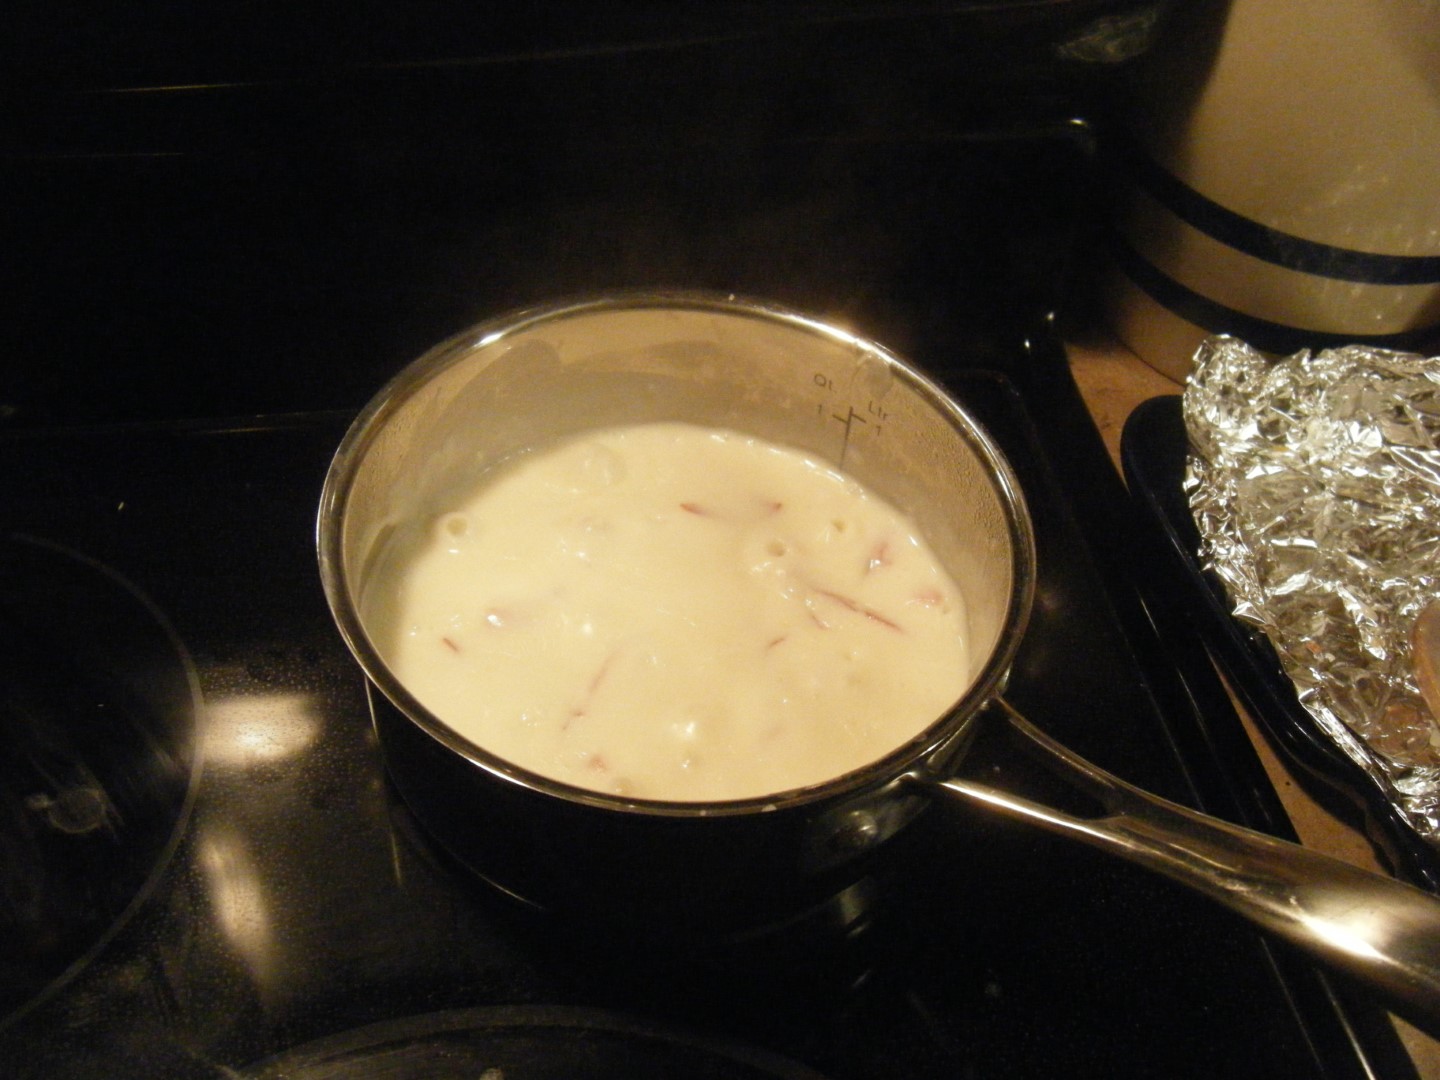 chipped beef on toast (1) (Large).JPG